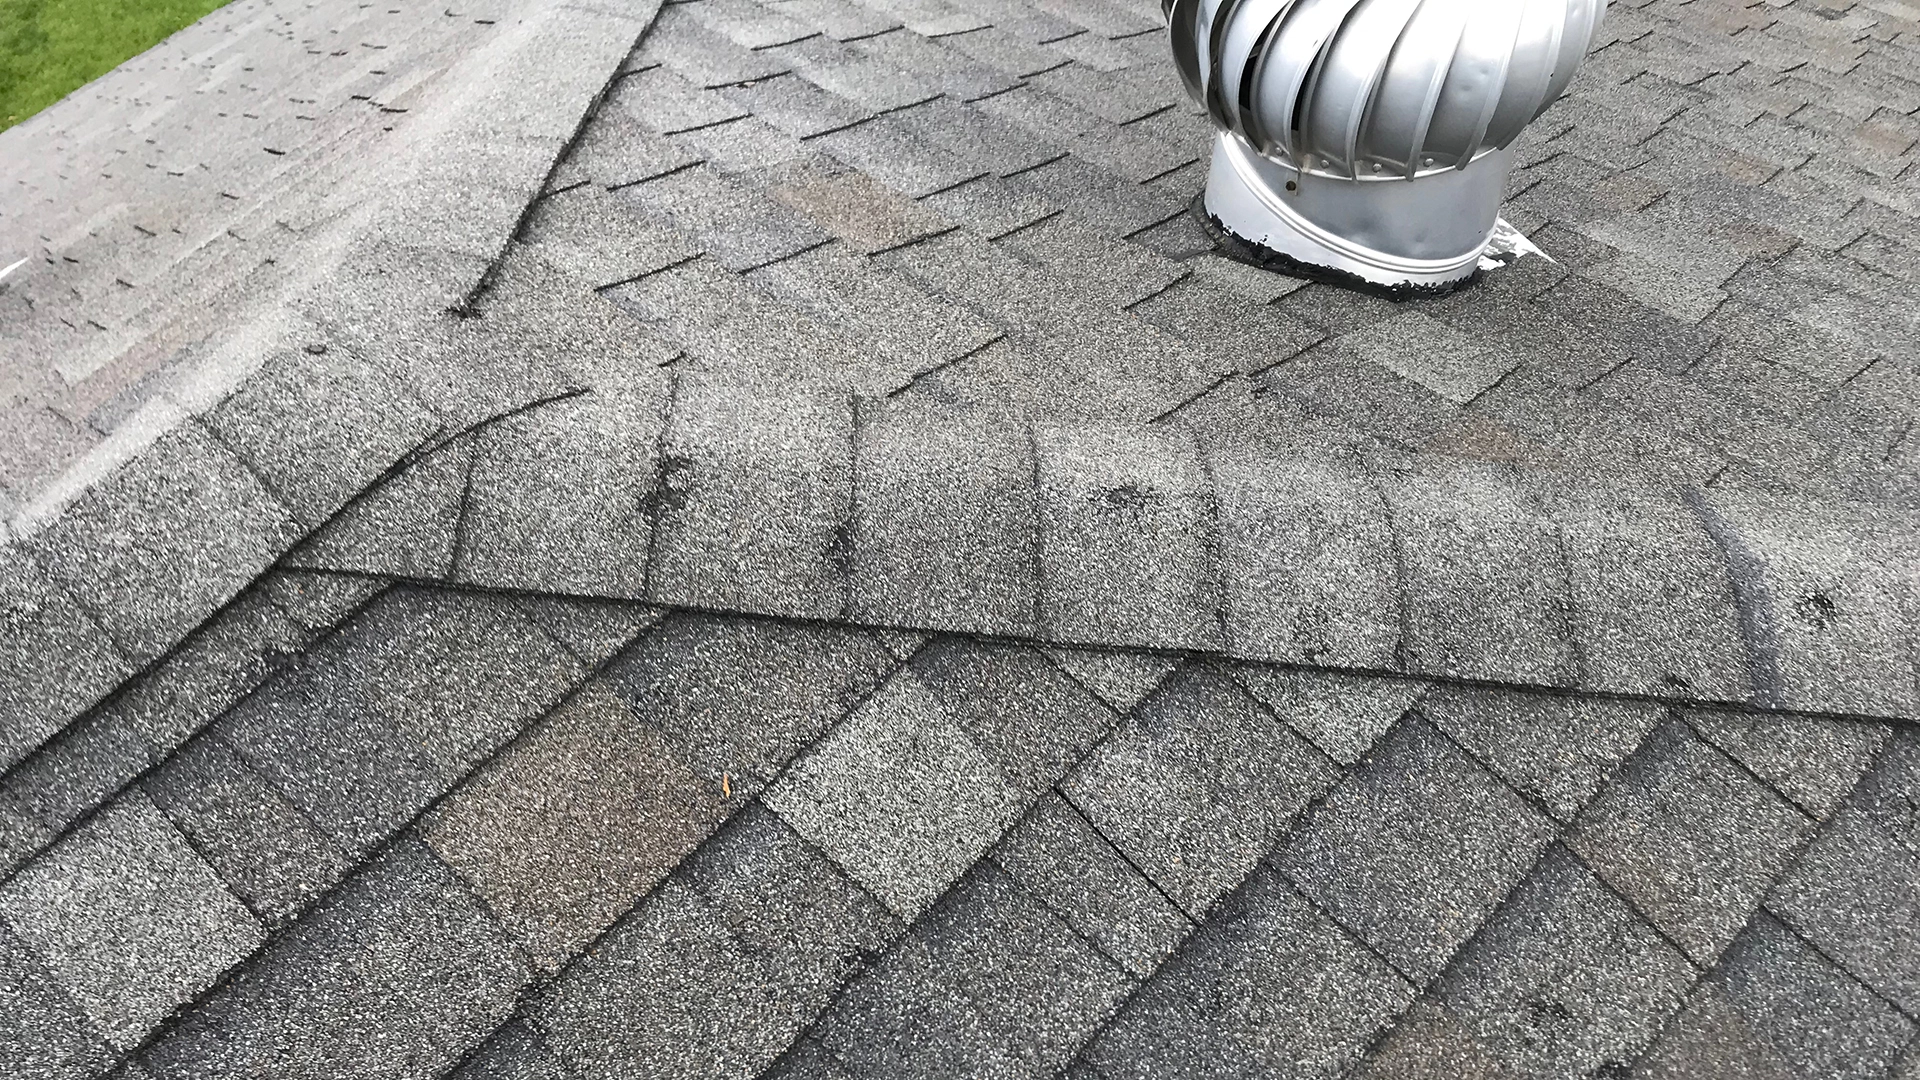 When Does My Roof Need to be Replaced vs Repaired?